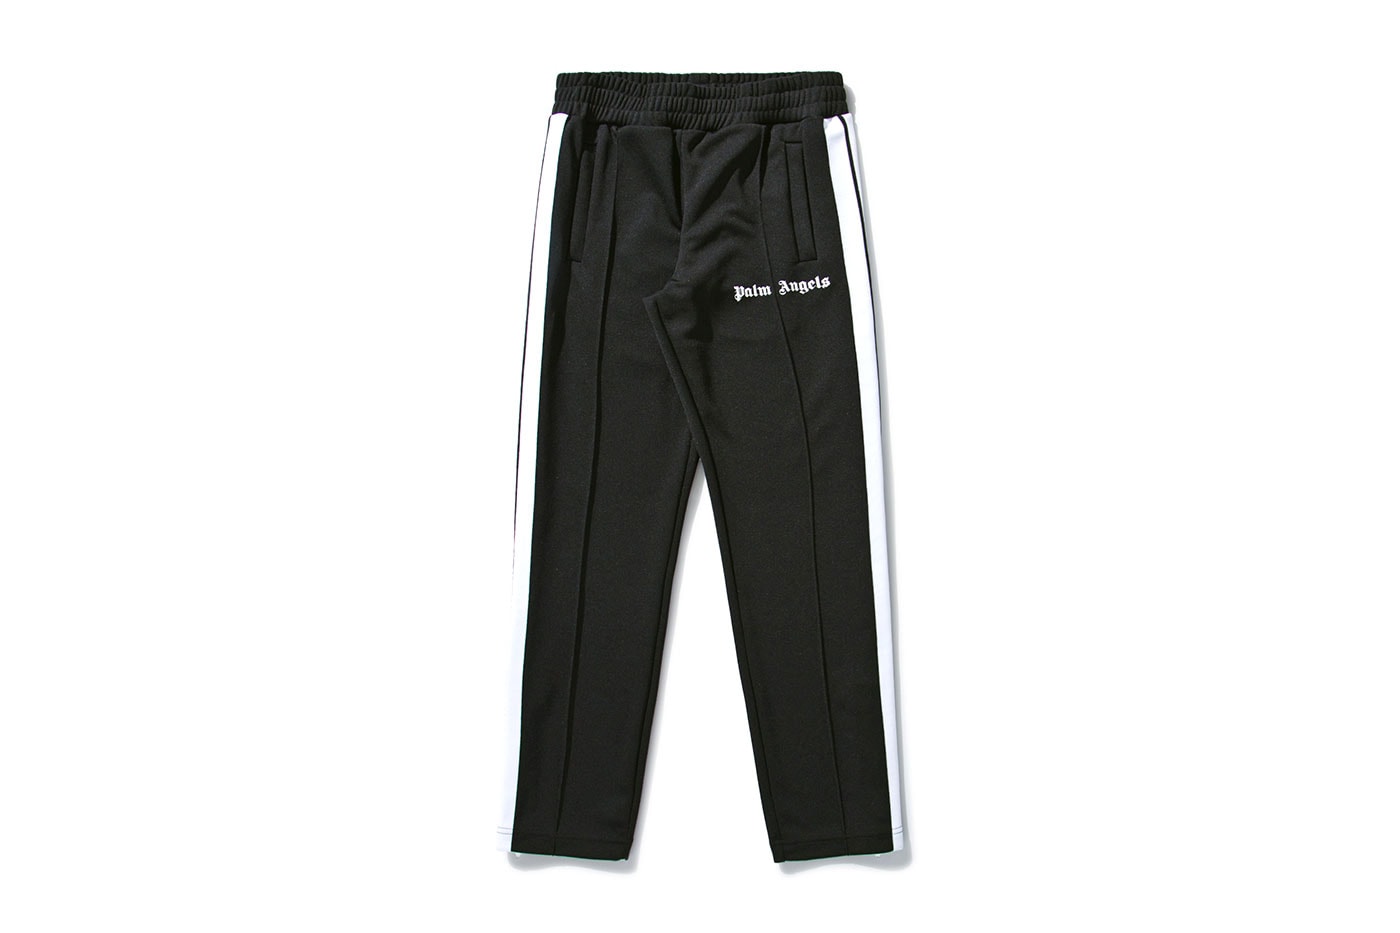 Palm Angels Classic Track Jacket Pants HBX Release Info Buy Price Black Green Navy Red